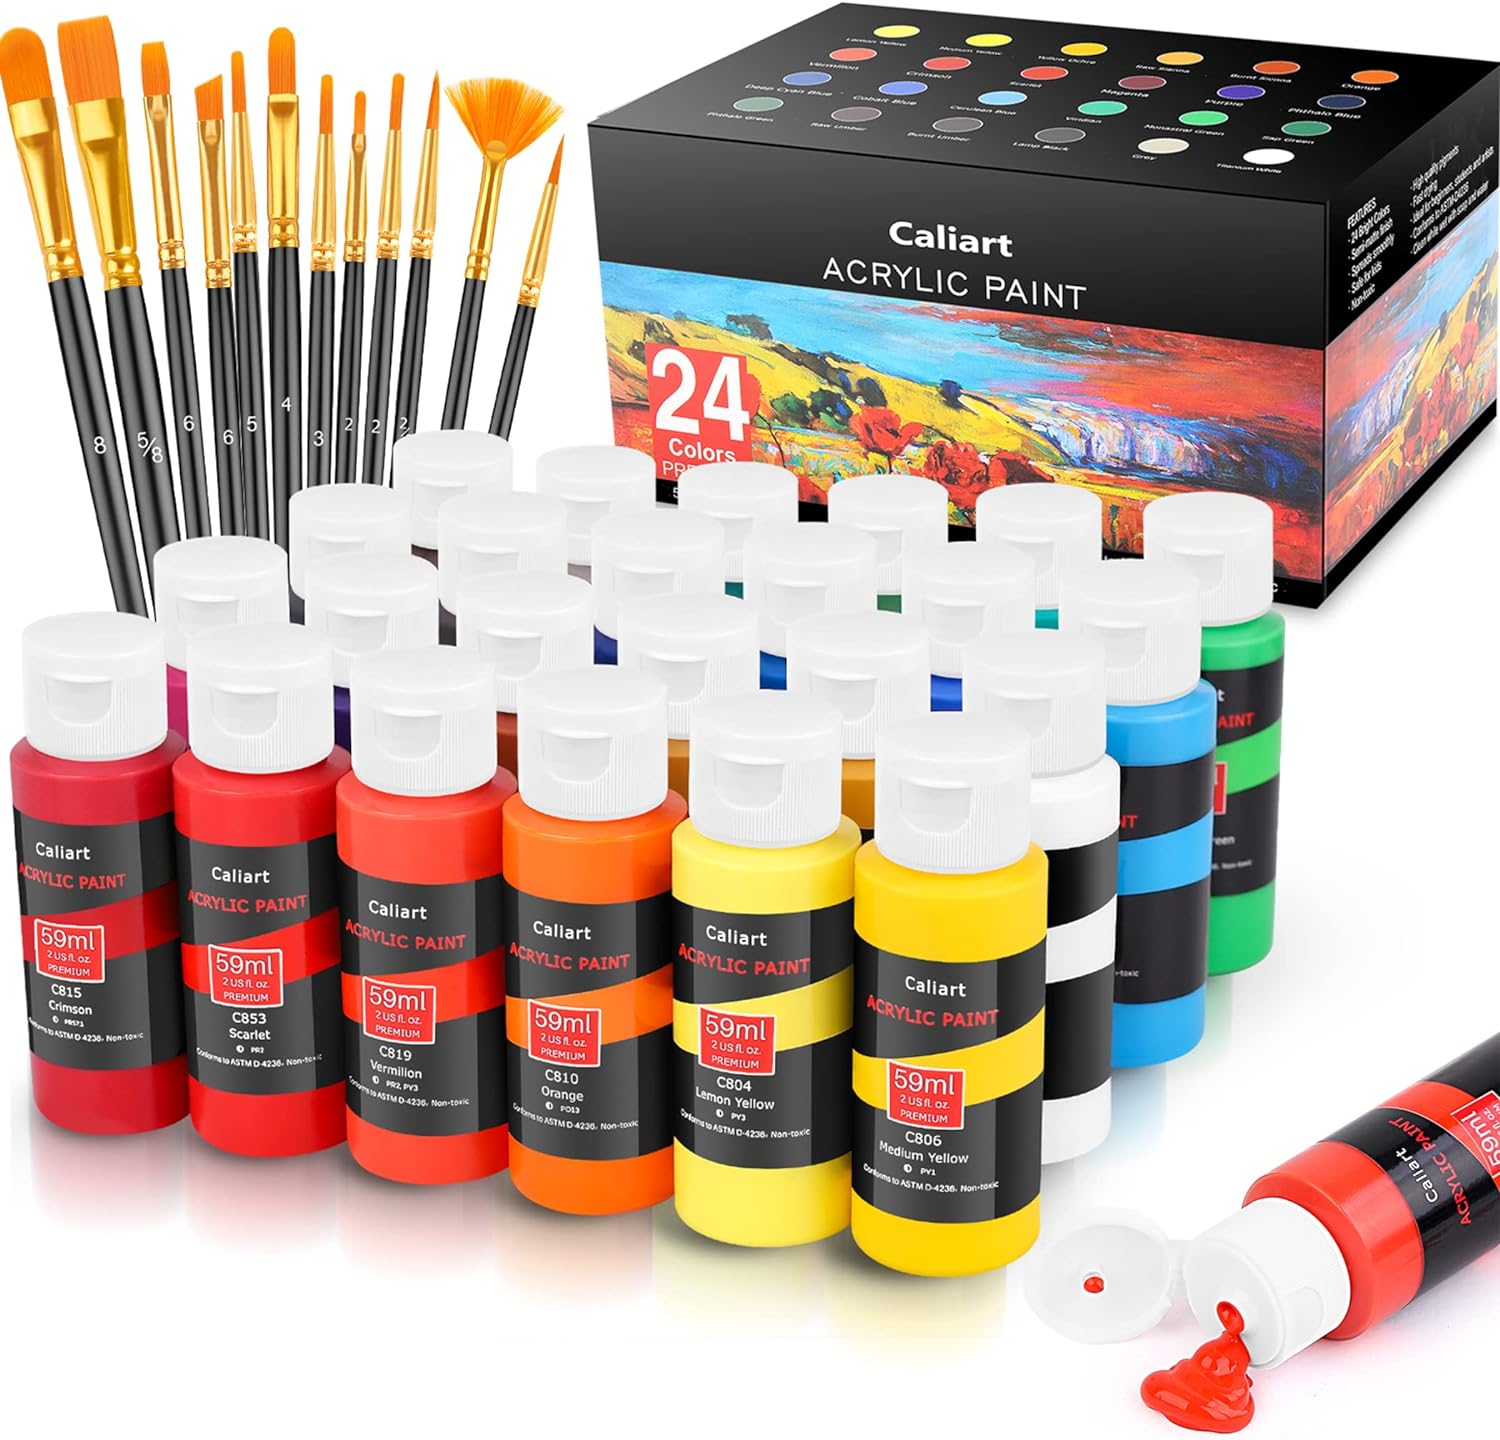 Caliart Acrylic Paint Set With 12 Brushes, 24 Colors (59ml, 2oz) Art Craft Paints Gifts for Artists Kids Beginners & Painters, Halloween Pumpkin Canvas Ceramic Rock Painting Kit Art Supplies